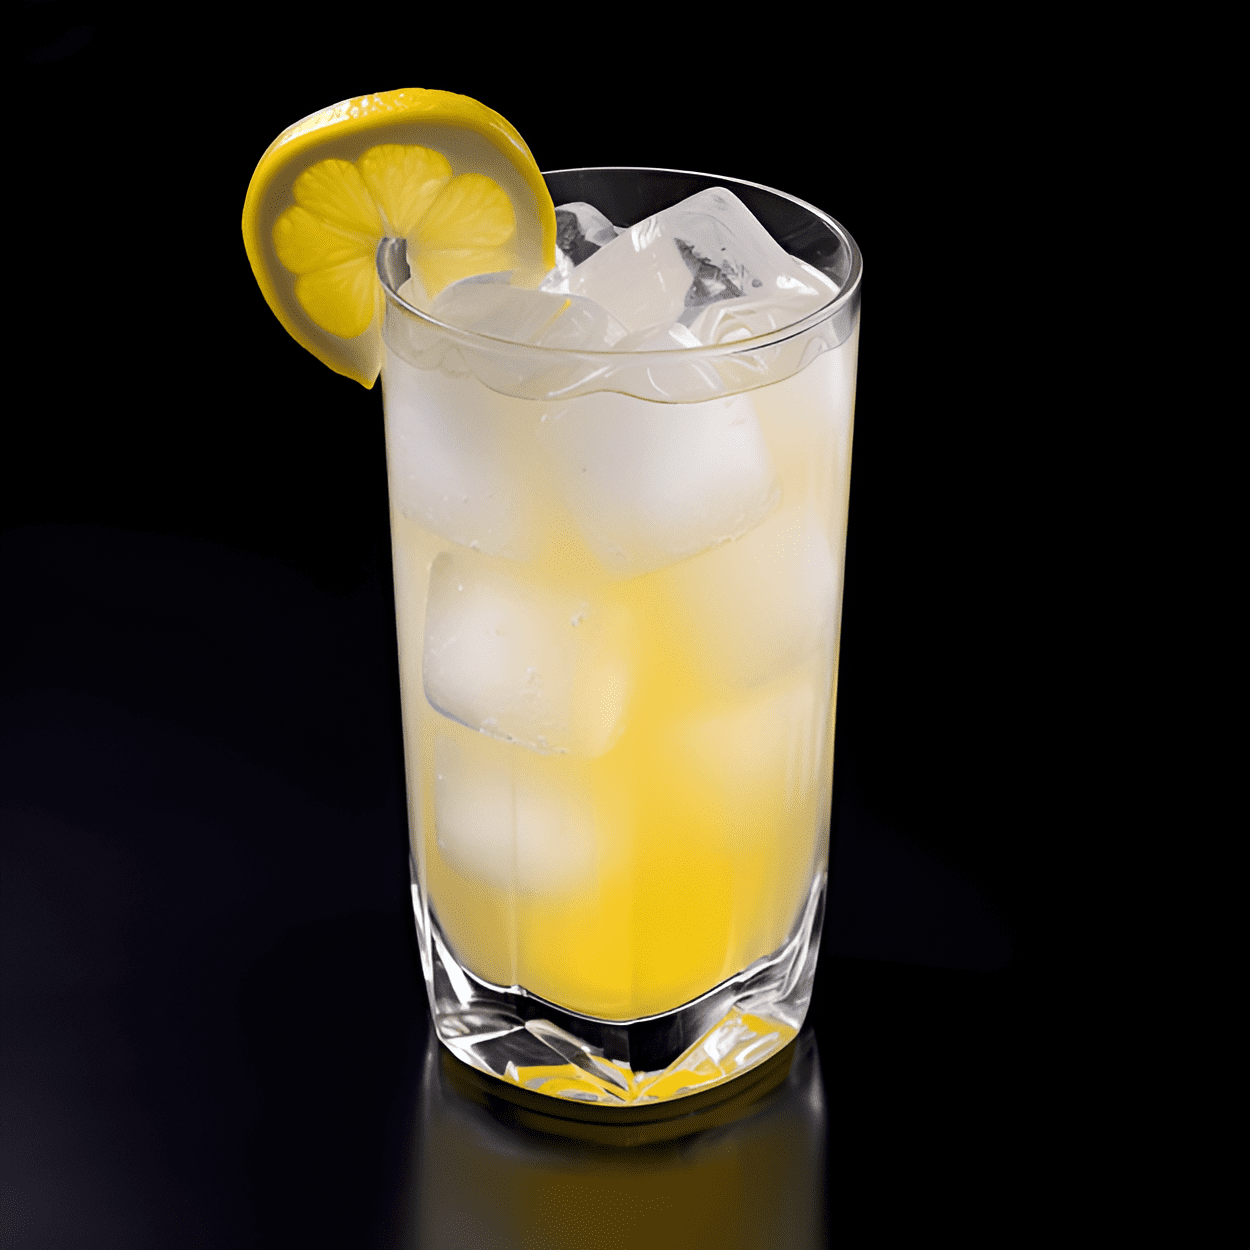 Creek Water Cocktail Recipe - The Creek Water cocktail is a delightful blend of sweet and sour. The citrusy tang of the lemon juice is balanced by the sweetness of the simple syrup, while the vodka adds a smooth, subtle kick. It's light, refreshing, and perfect for a hot summer day.